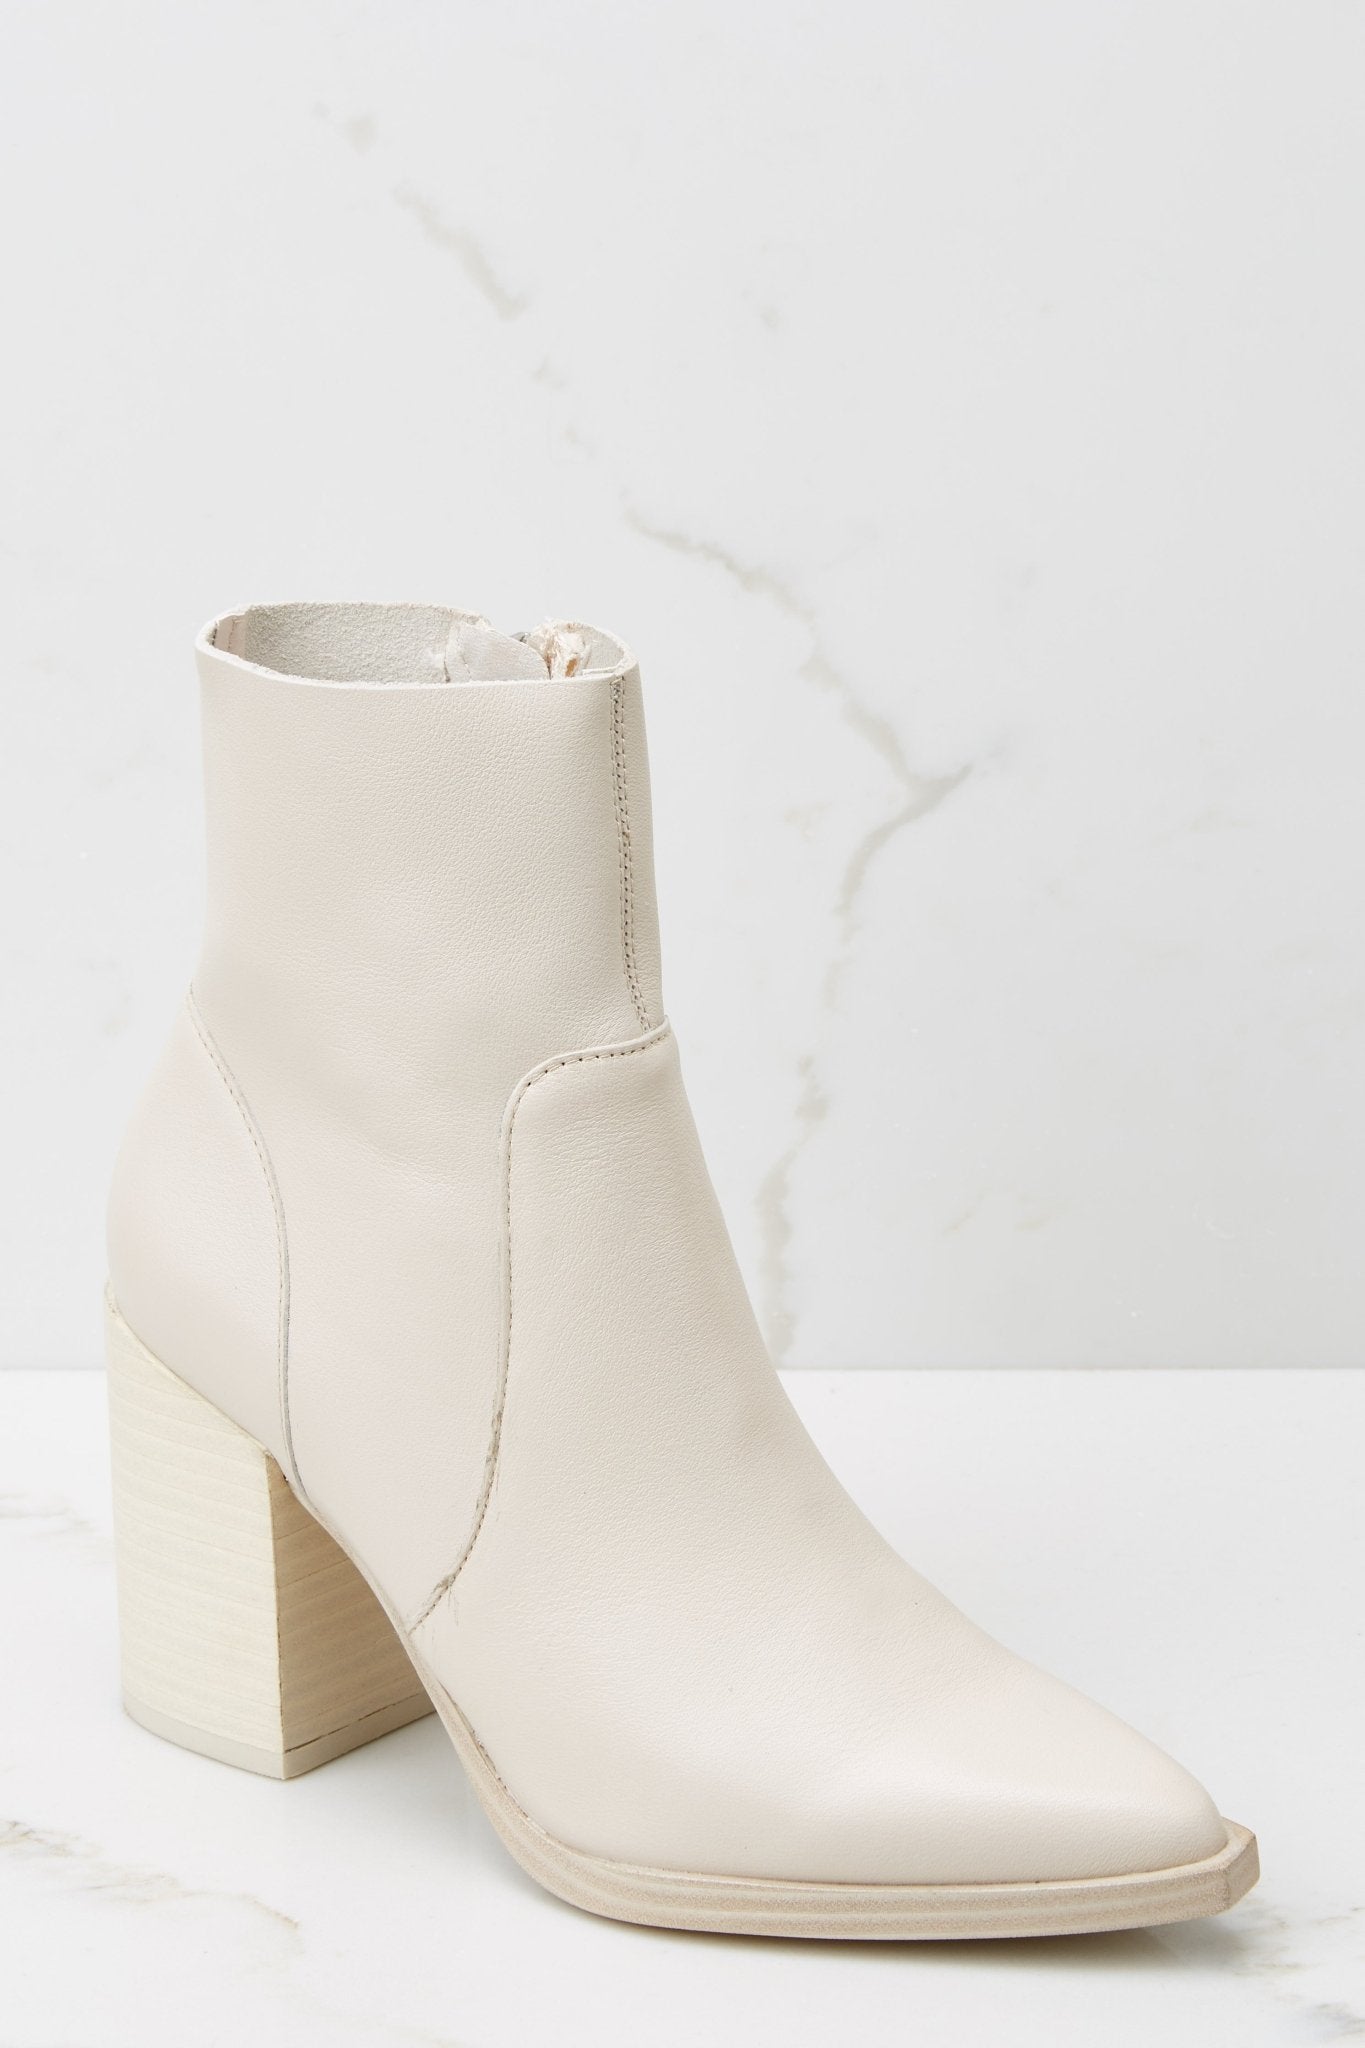 Calabria Bone Pointed Toe Bootie